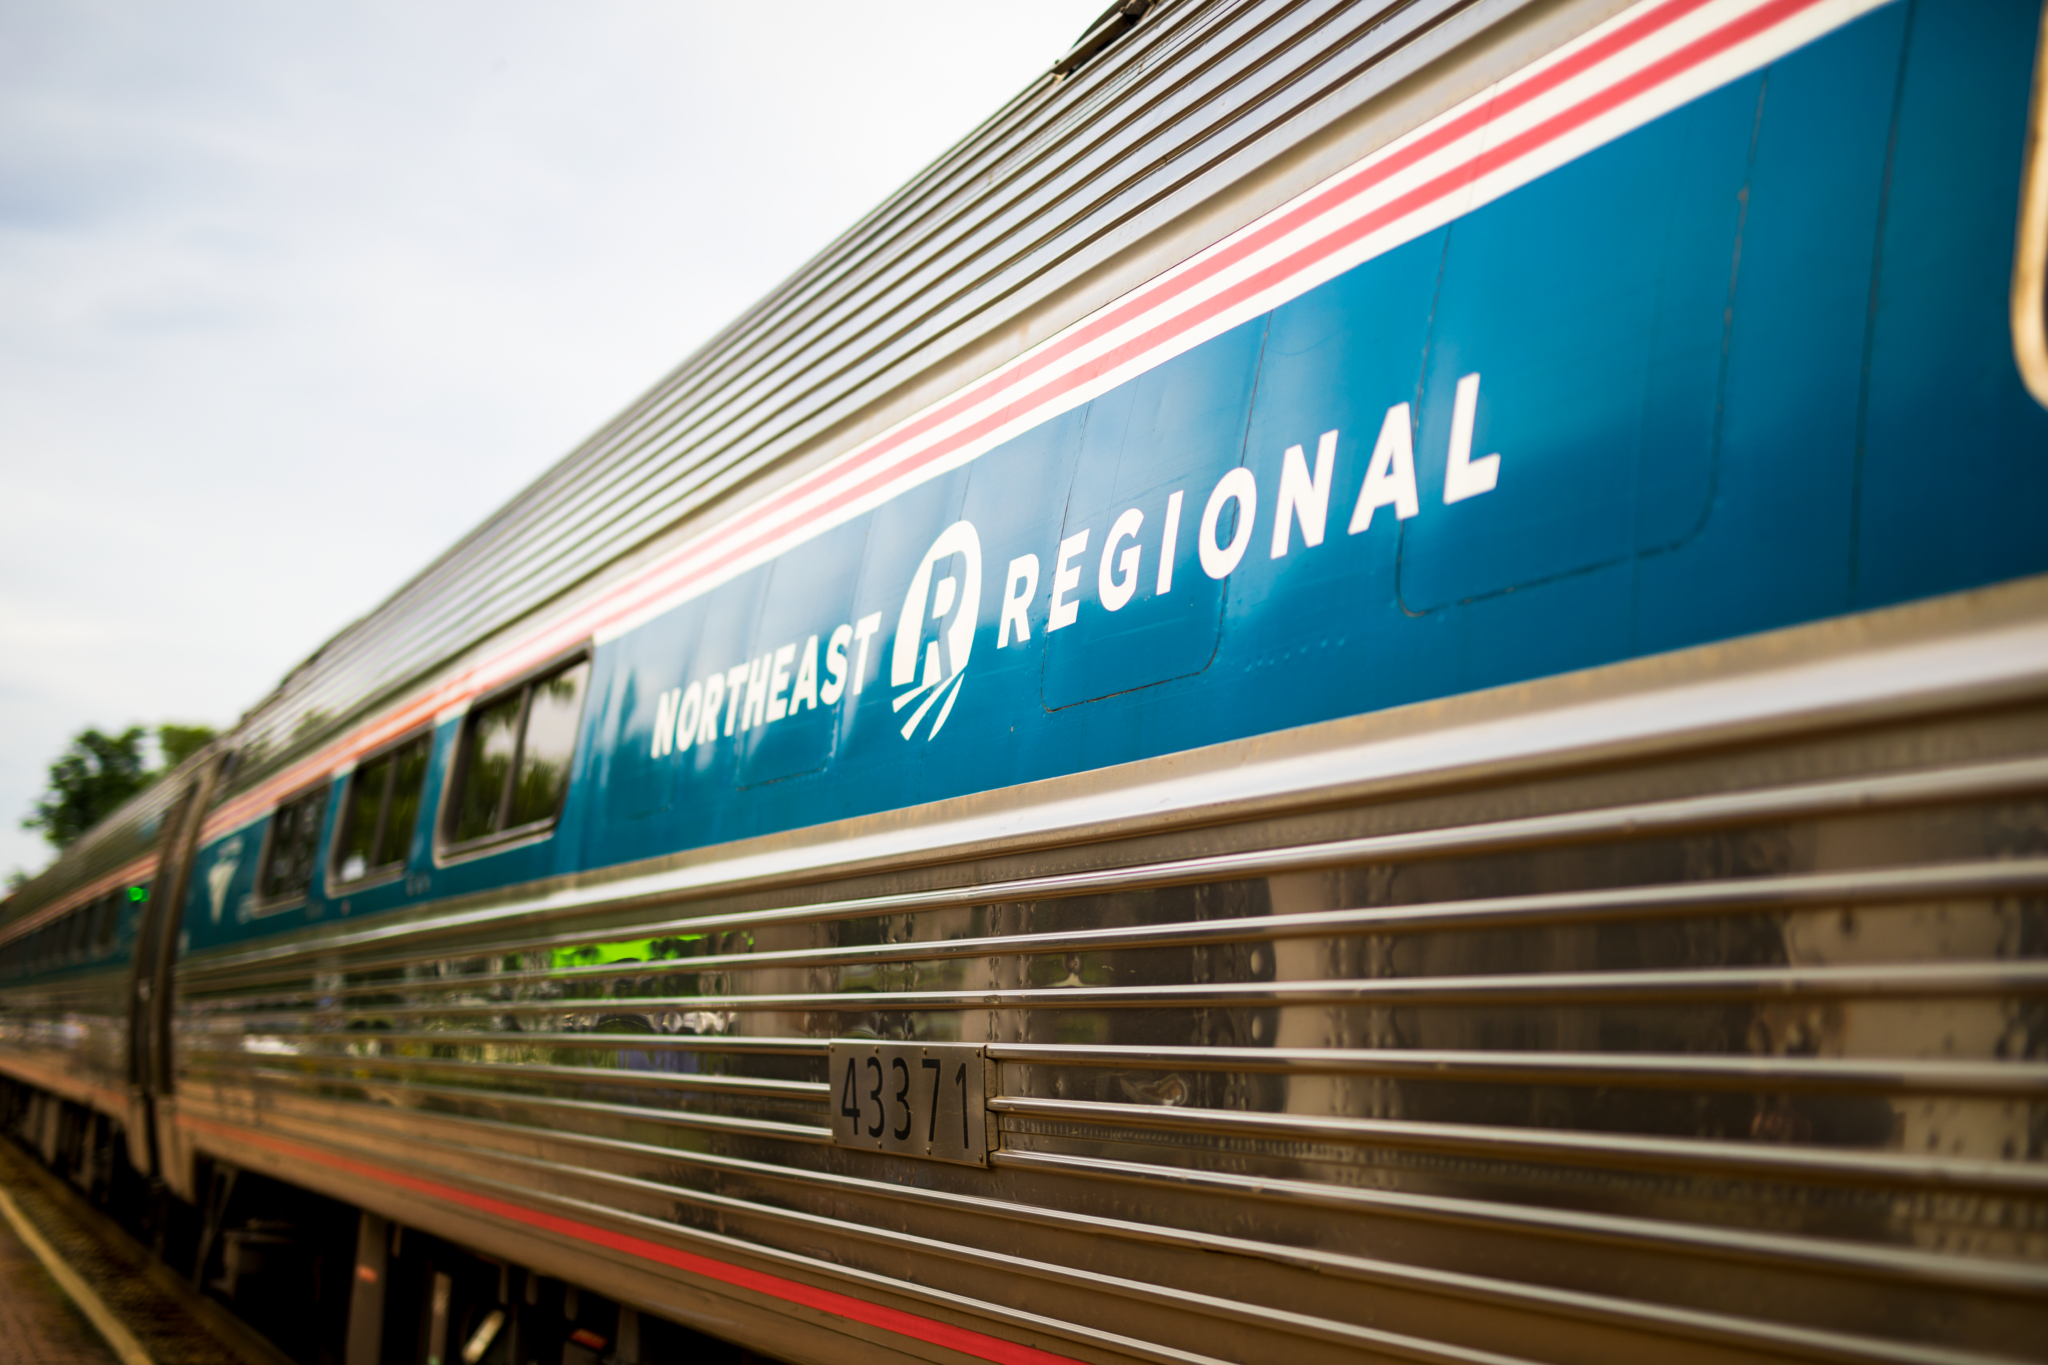 Amtrak is Improving Reliability for the Future